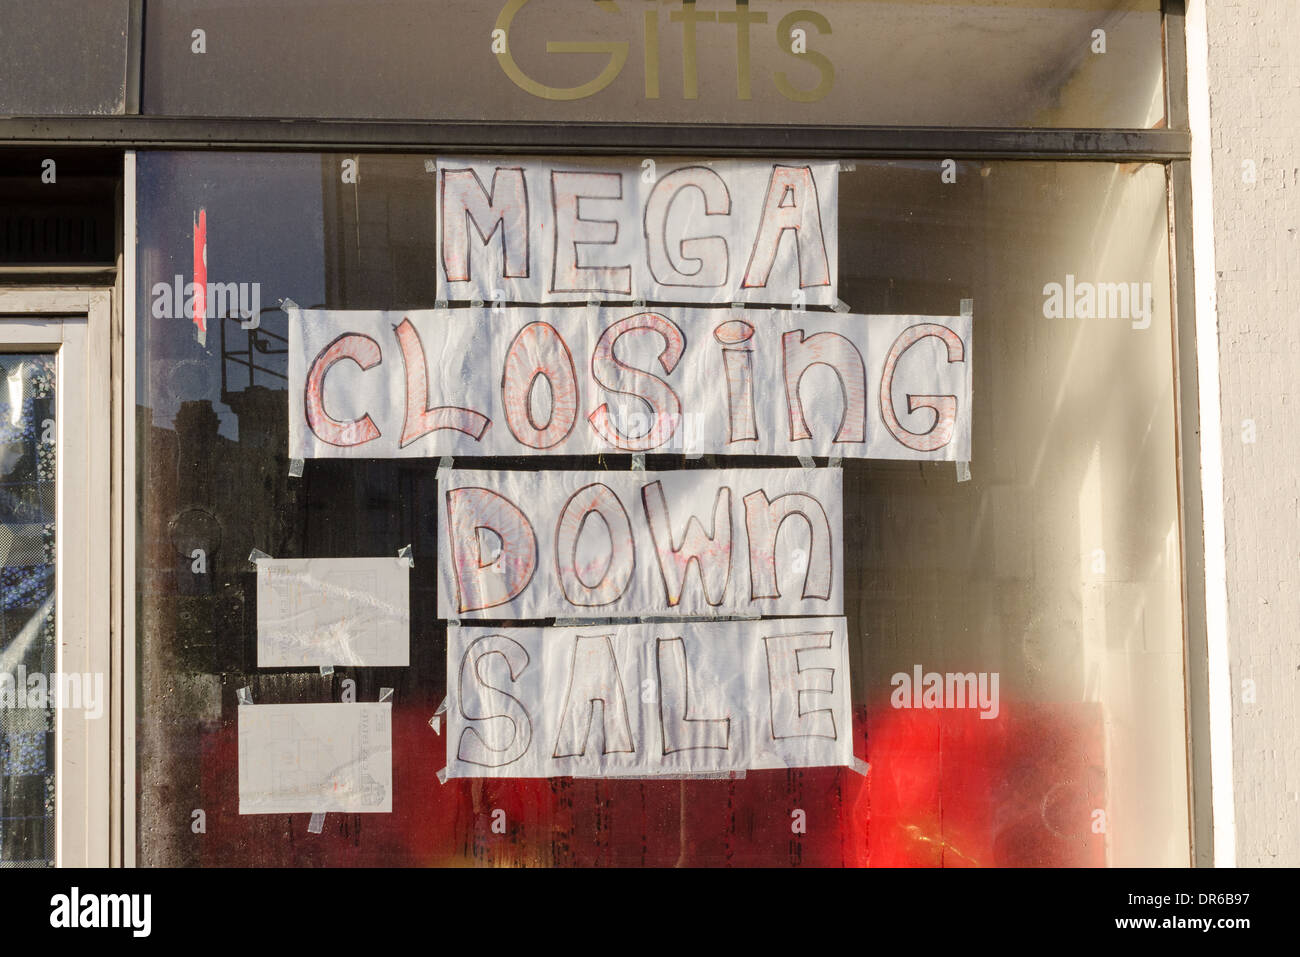 Mega Closing Down Sale hand drawn poster in shop window Stock Photo